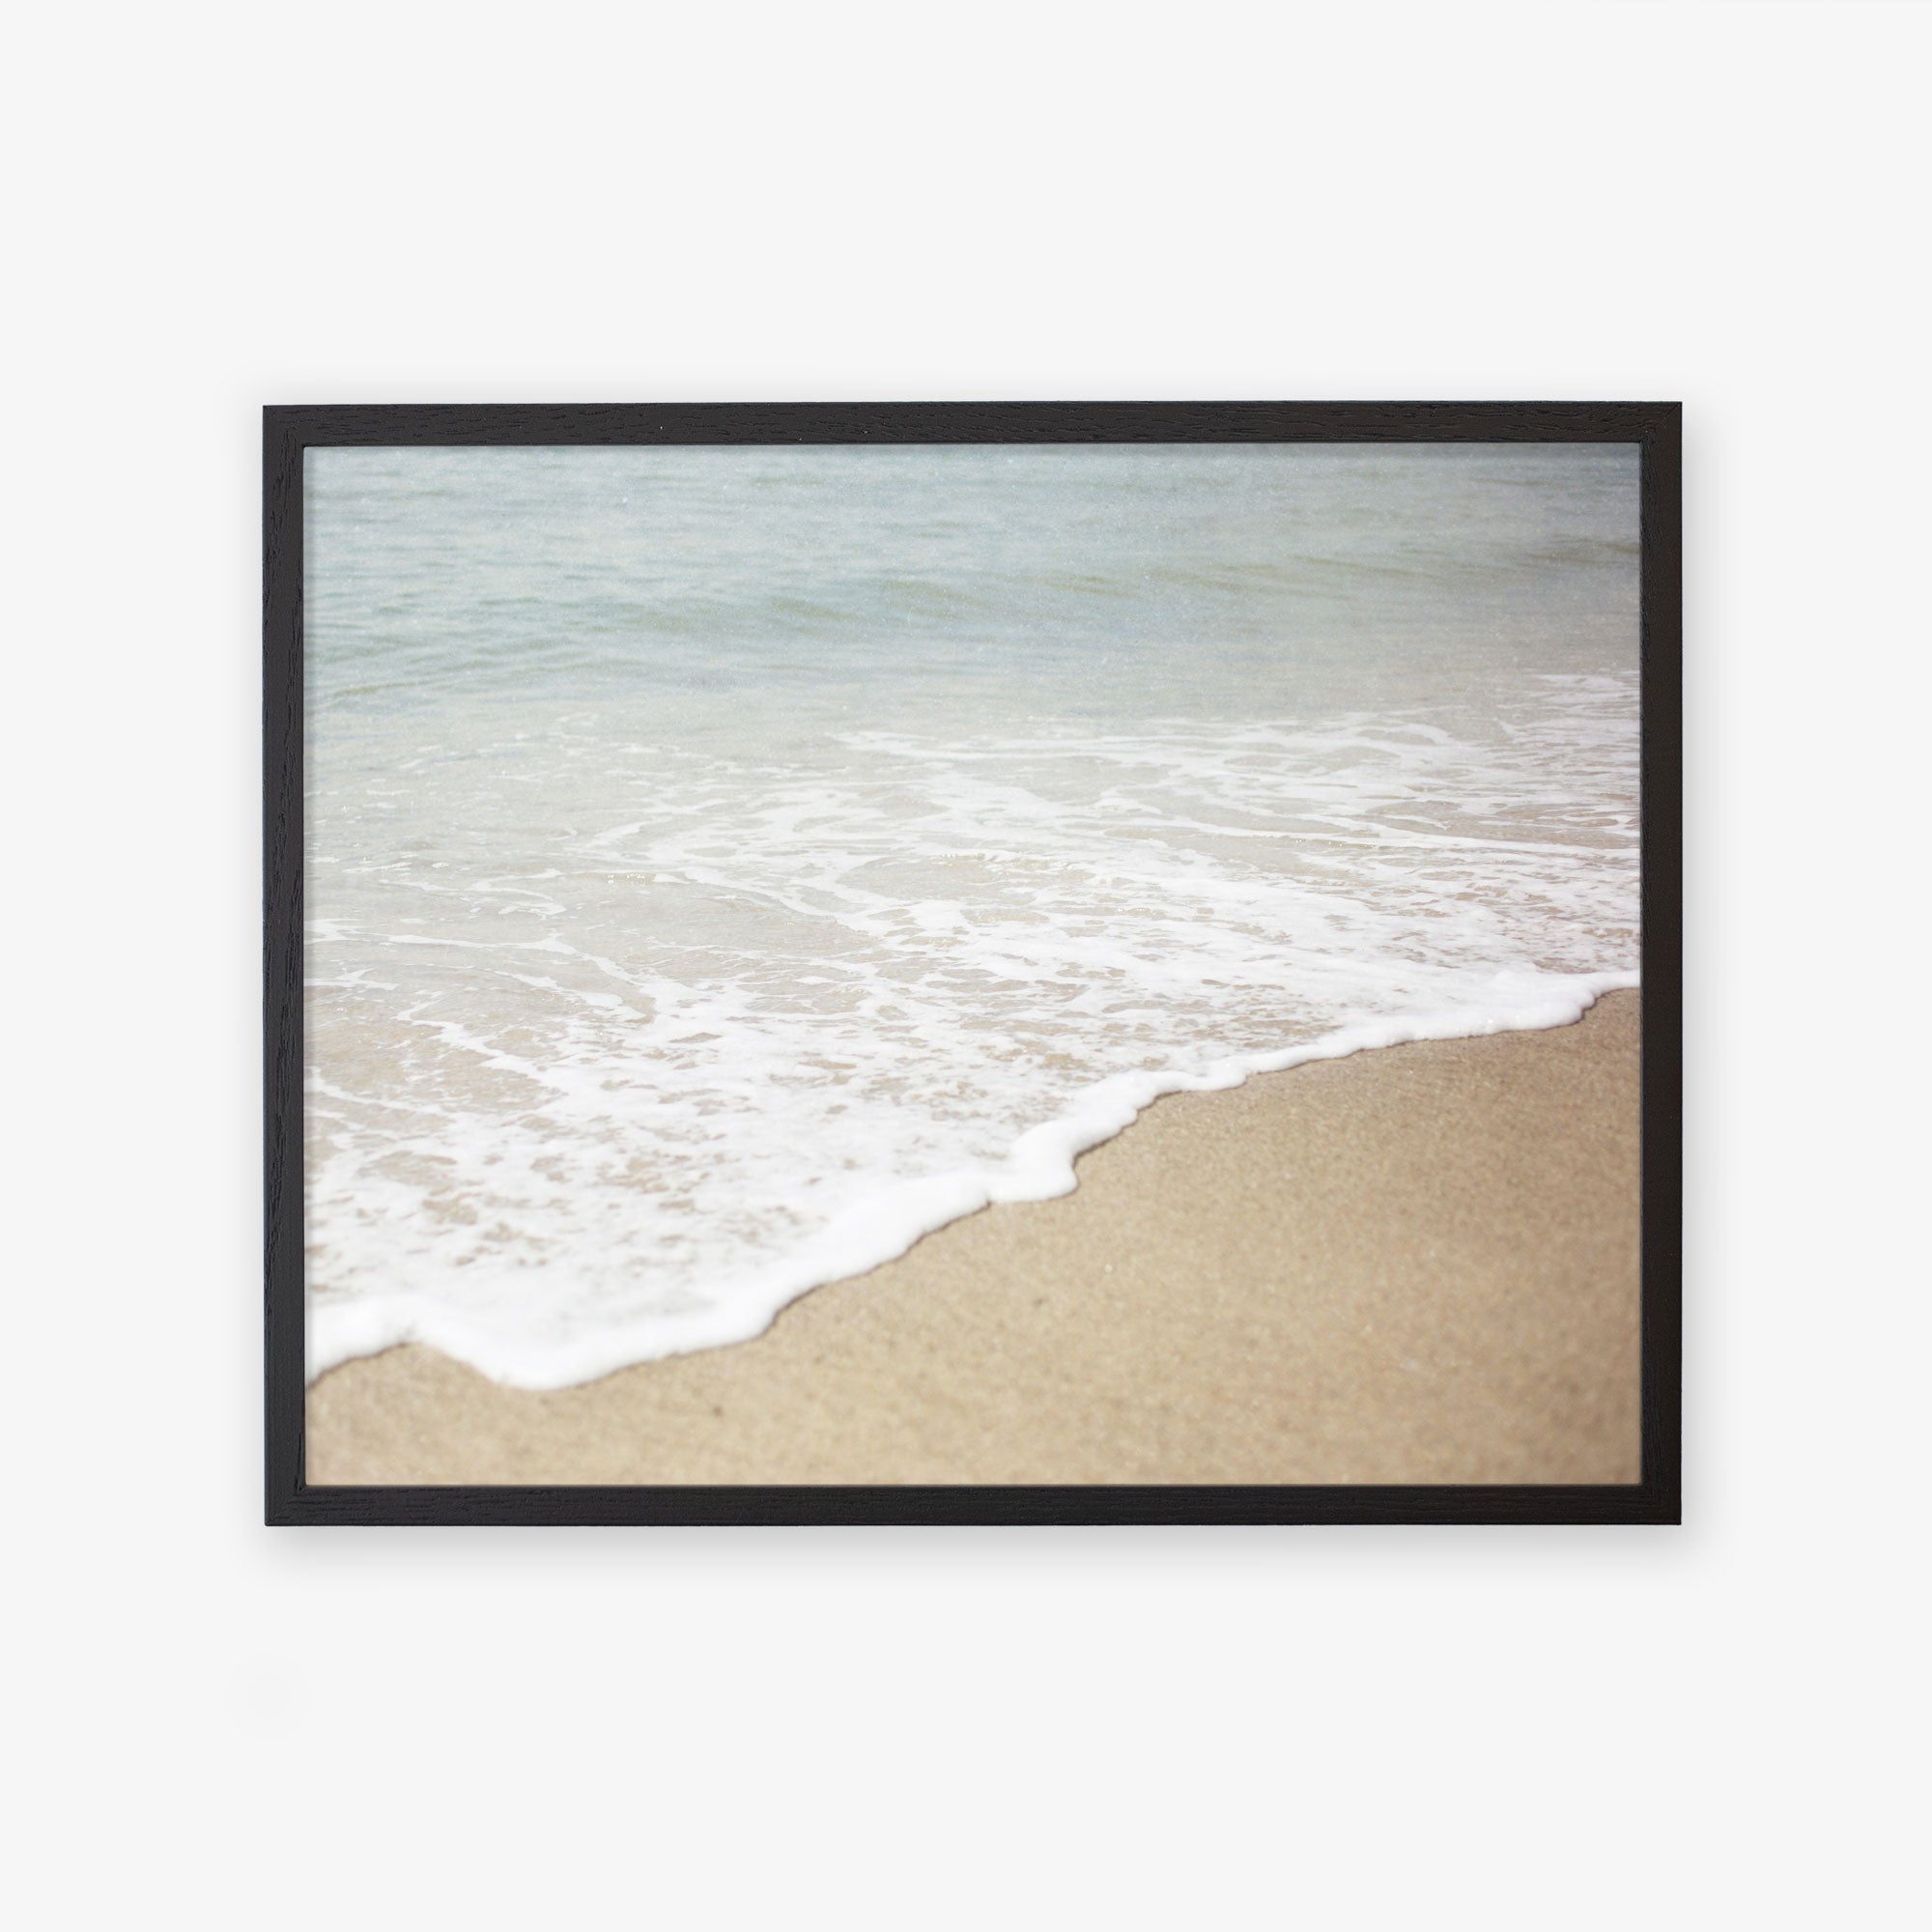 A framed photograph of a serene California beach scene showing Beach Waves Print, &#39;Chasing Surf&#39; by Offley Green, printed on archival photographic paper.